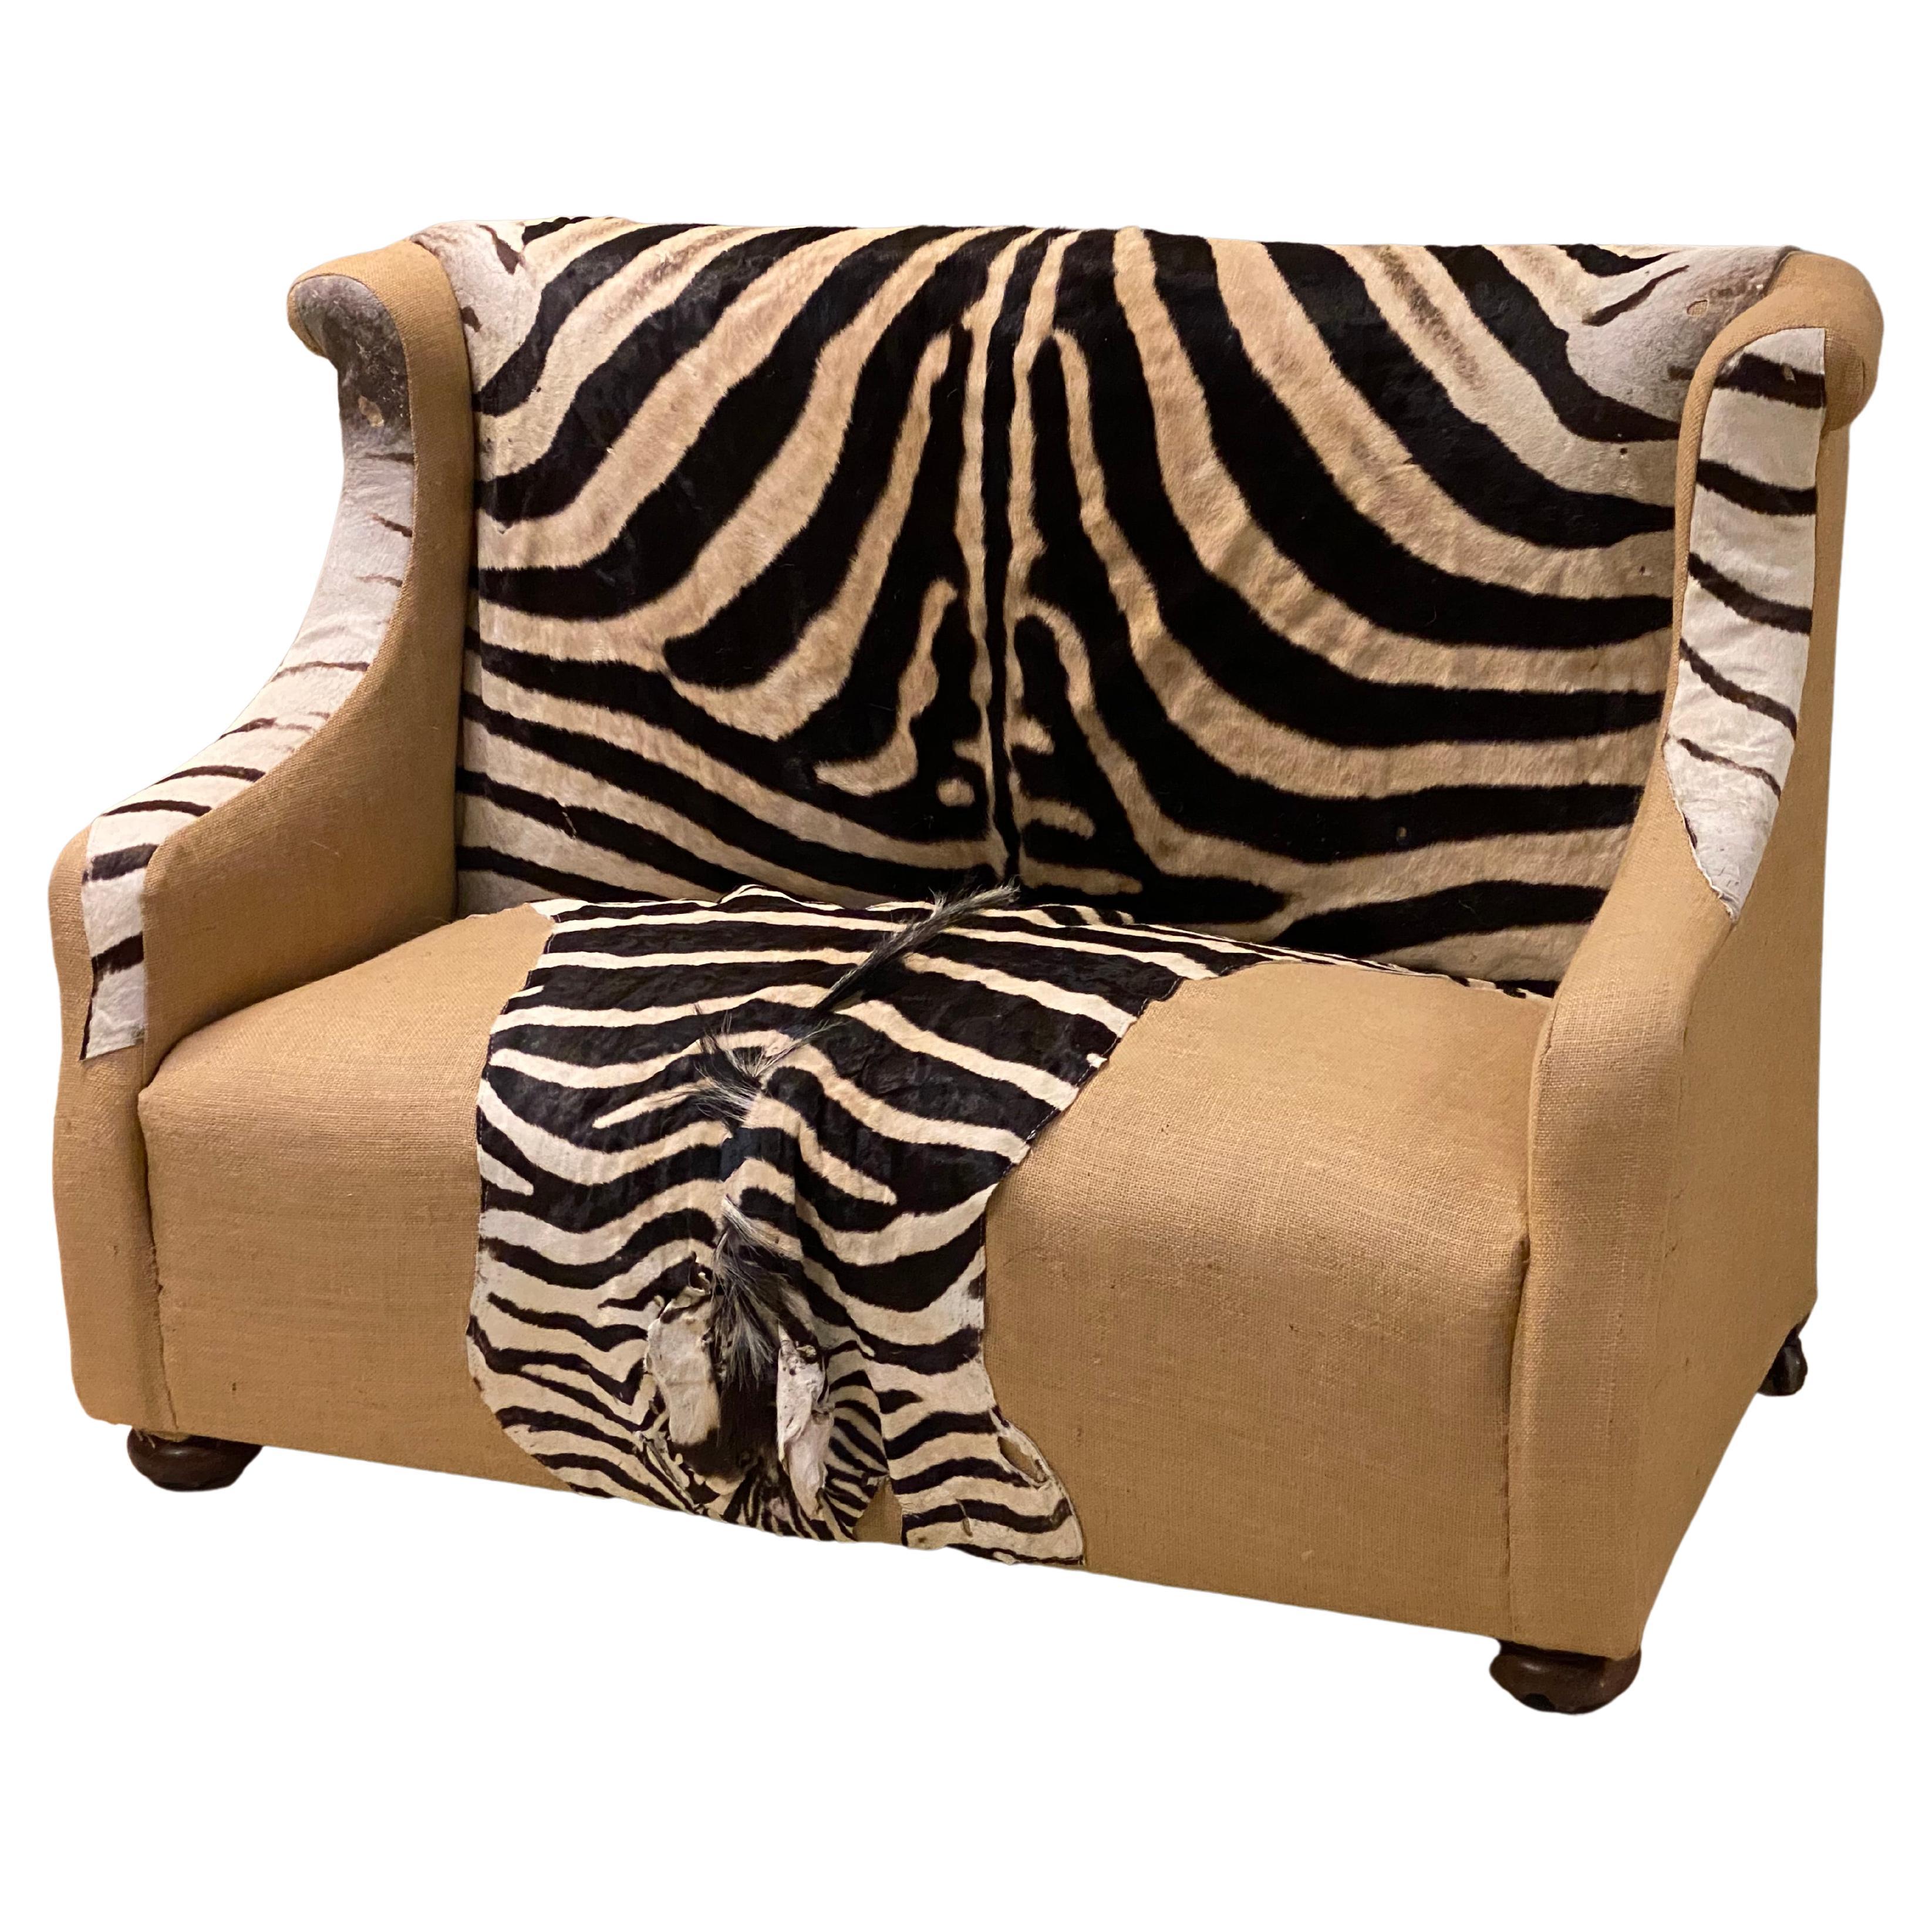 Antique Two Seater Canape with Real Zebra Skin Upholstery